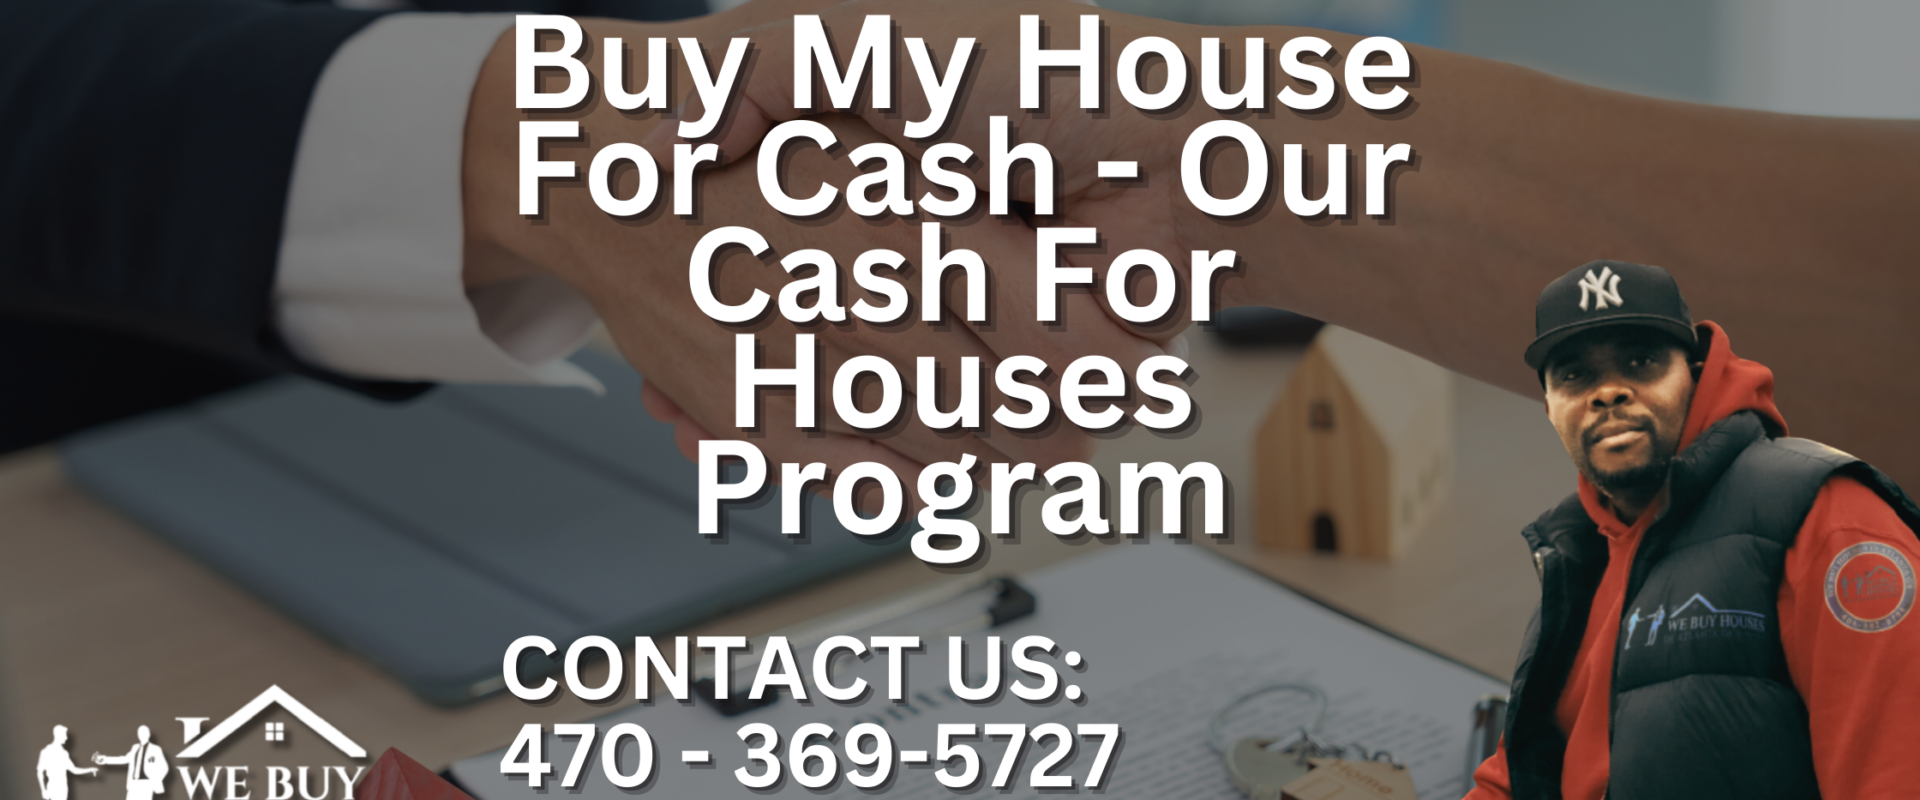 Buy-My-House-For-Cash-Our-Cash-For-Houses-Program